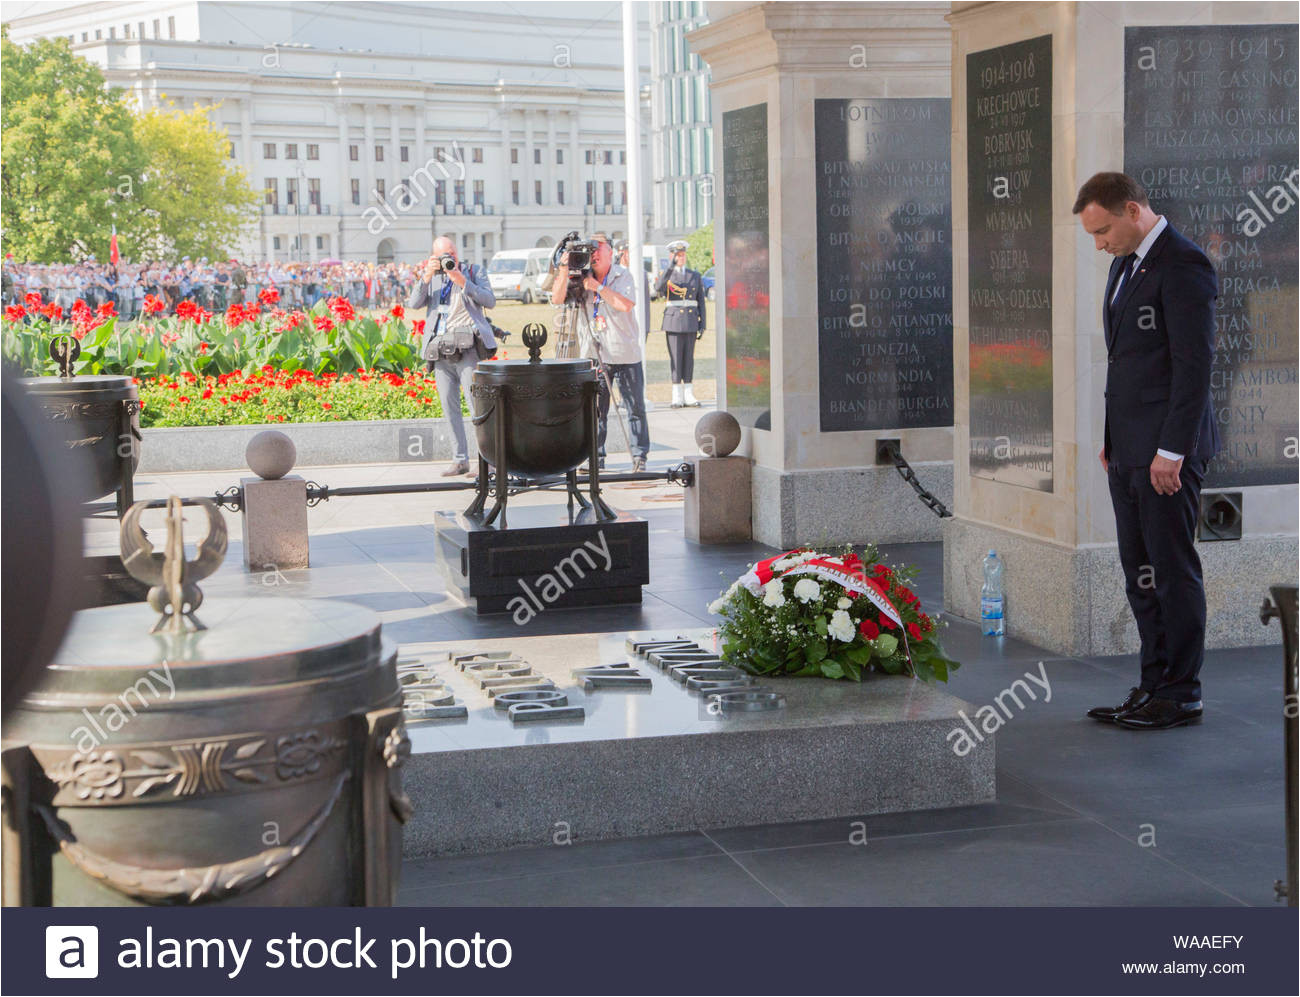 aug 6 2015 warsaw presidential inauguration in poland andrzej duda sworn in as new polish president ceremony at the marshal jozef pilsudski square andrzej duda took over supreme command over polish armed forces waaefy jpg